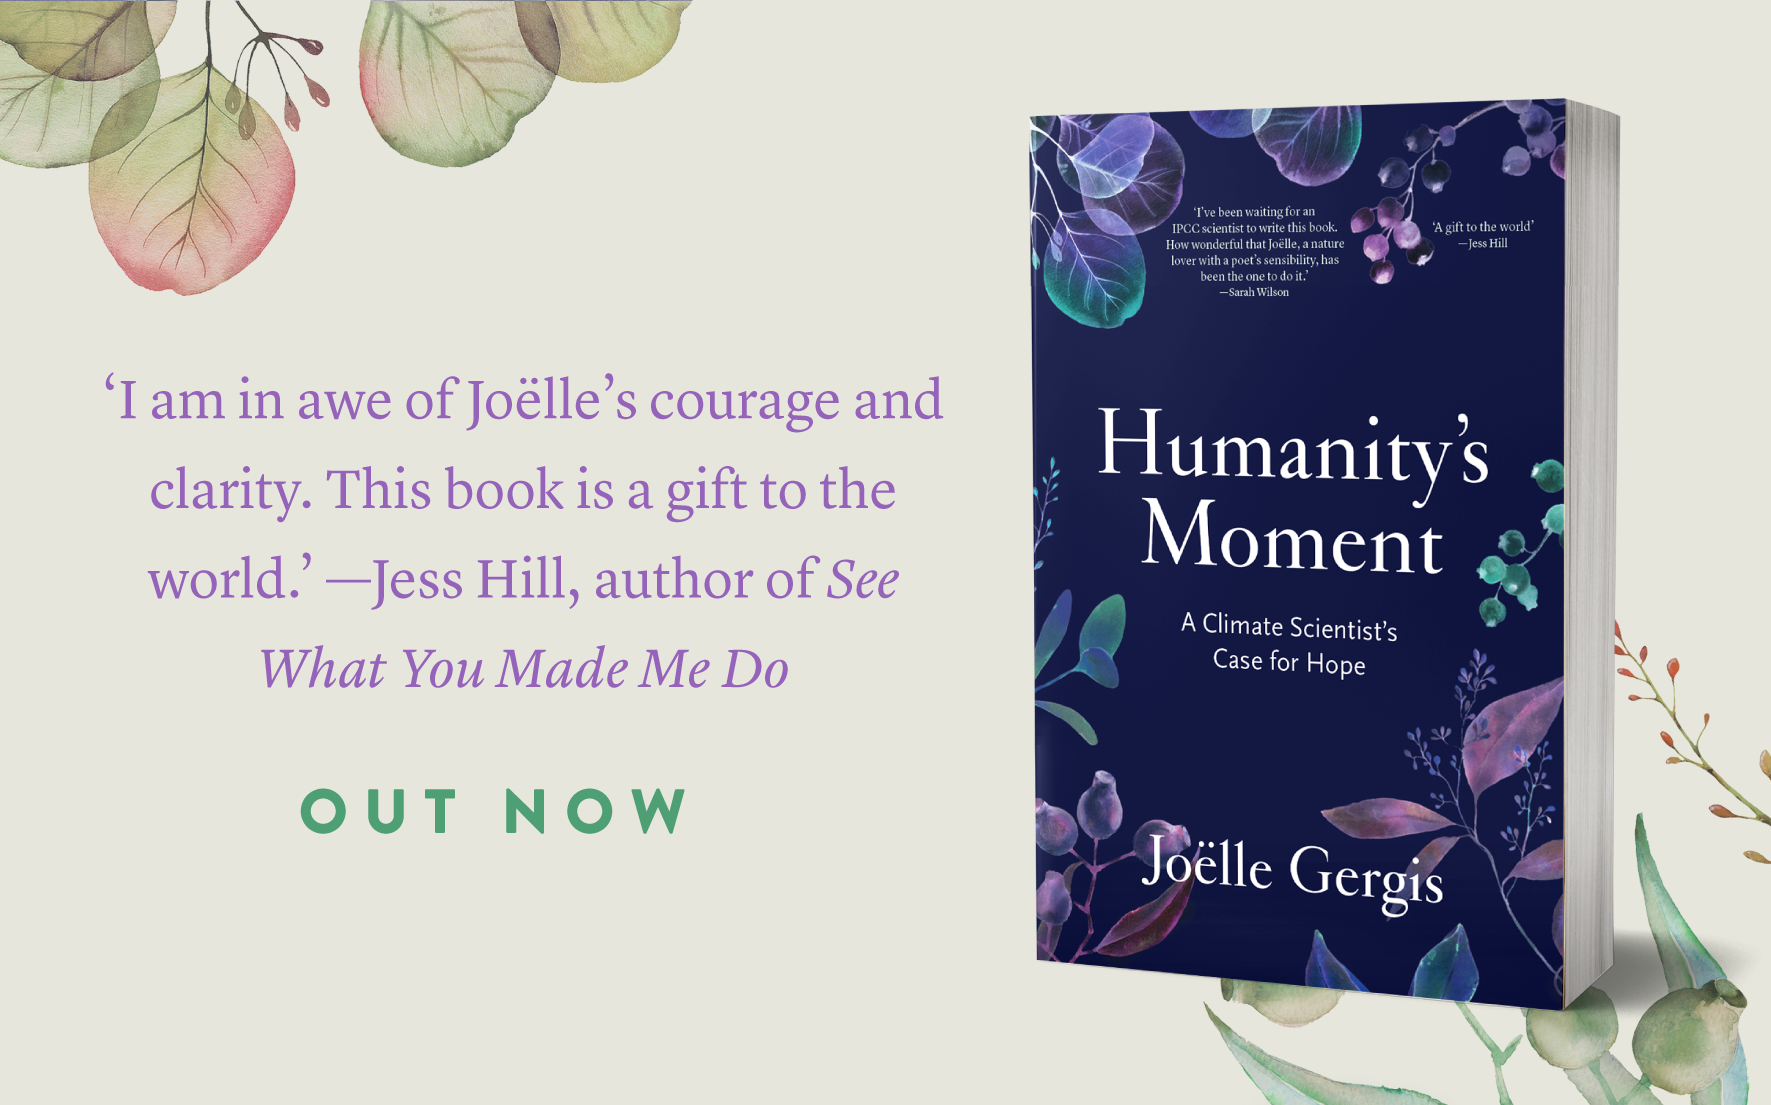 Out now: Humanity’s Moment